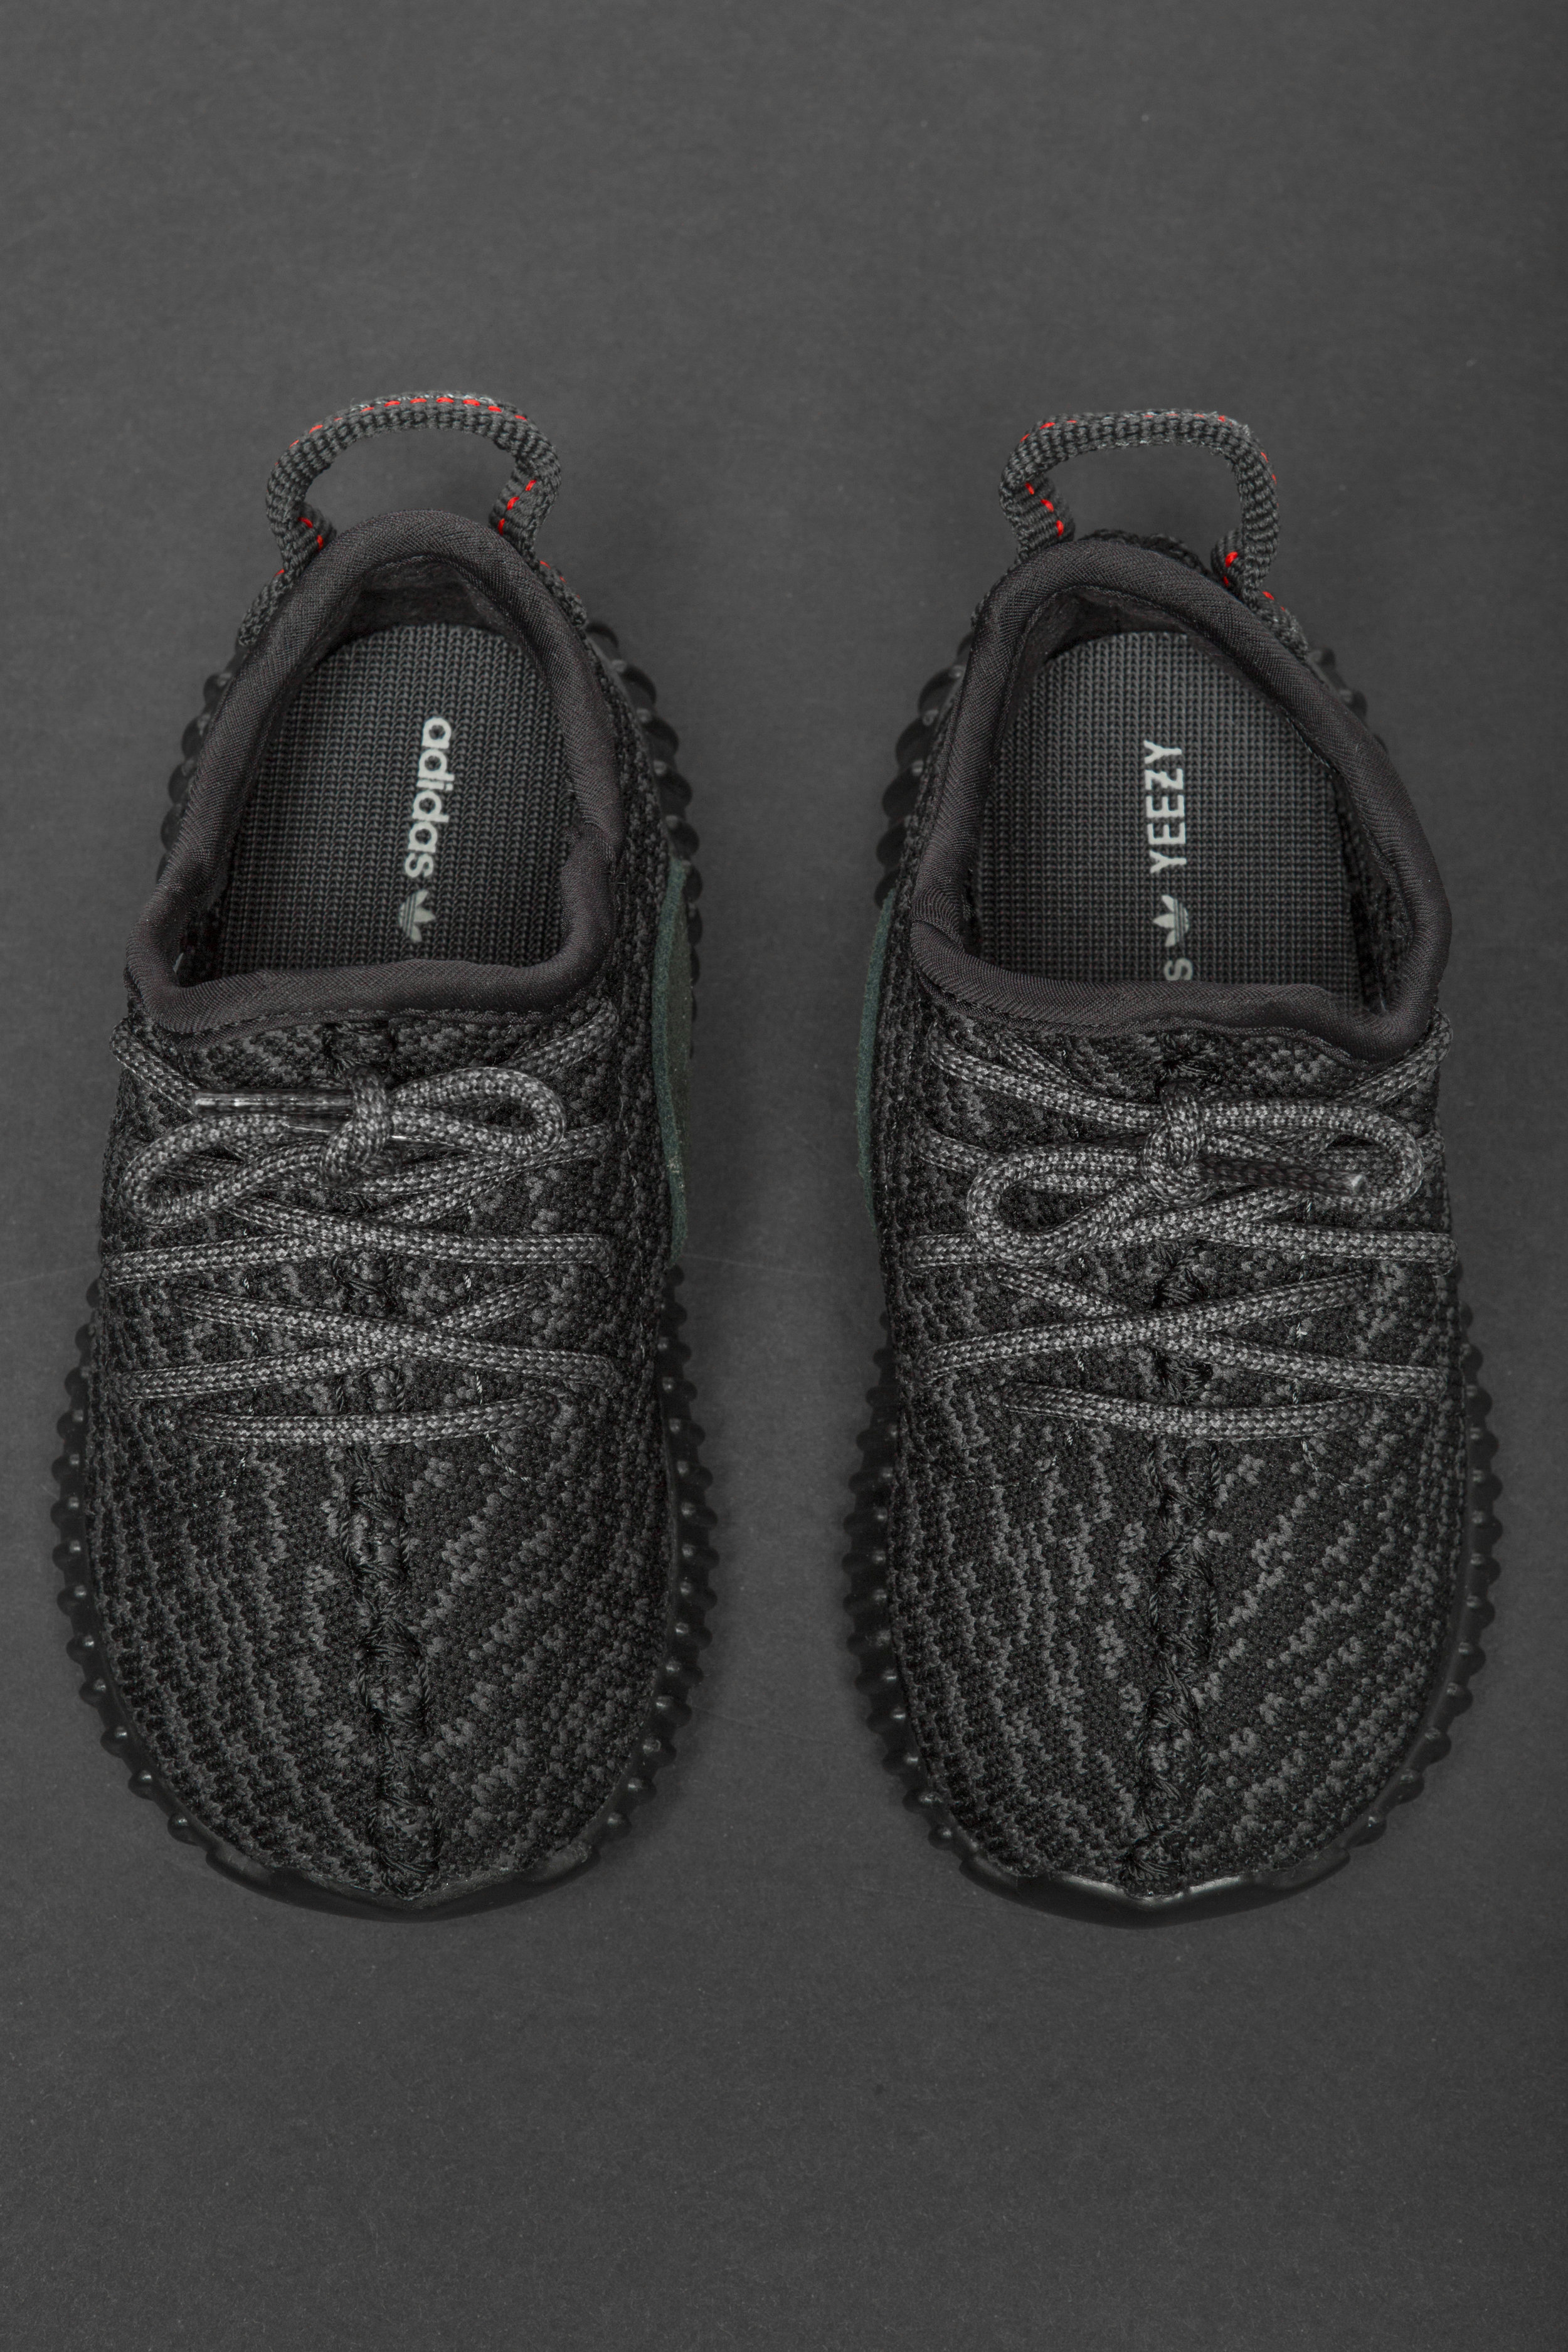 yeezy boost 350 infant pirate black